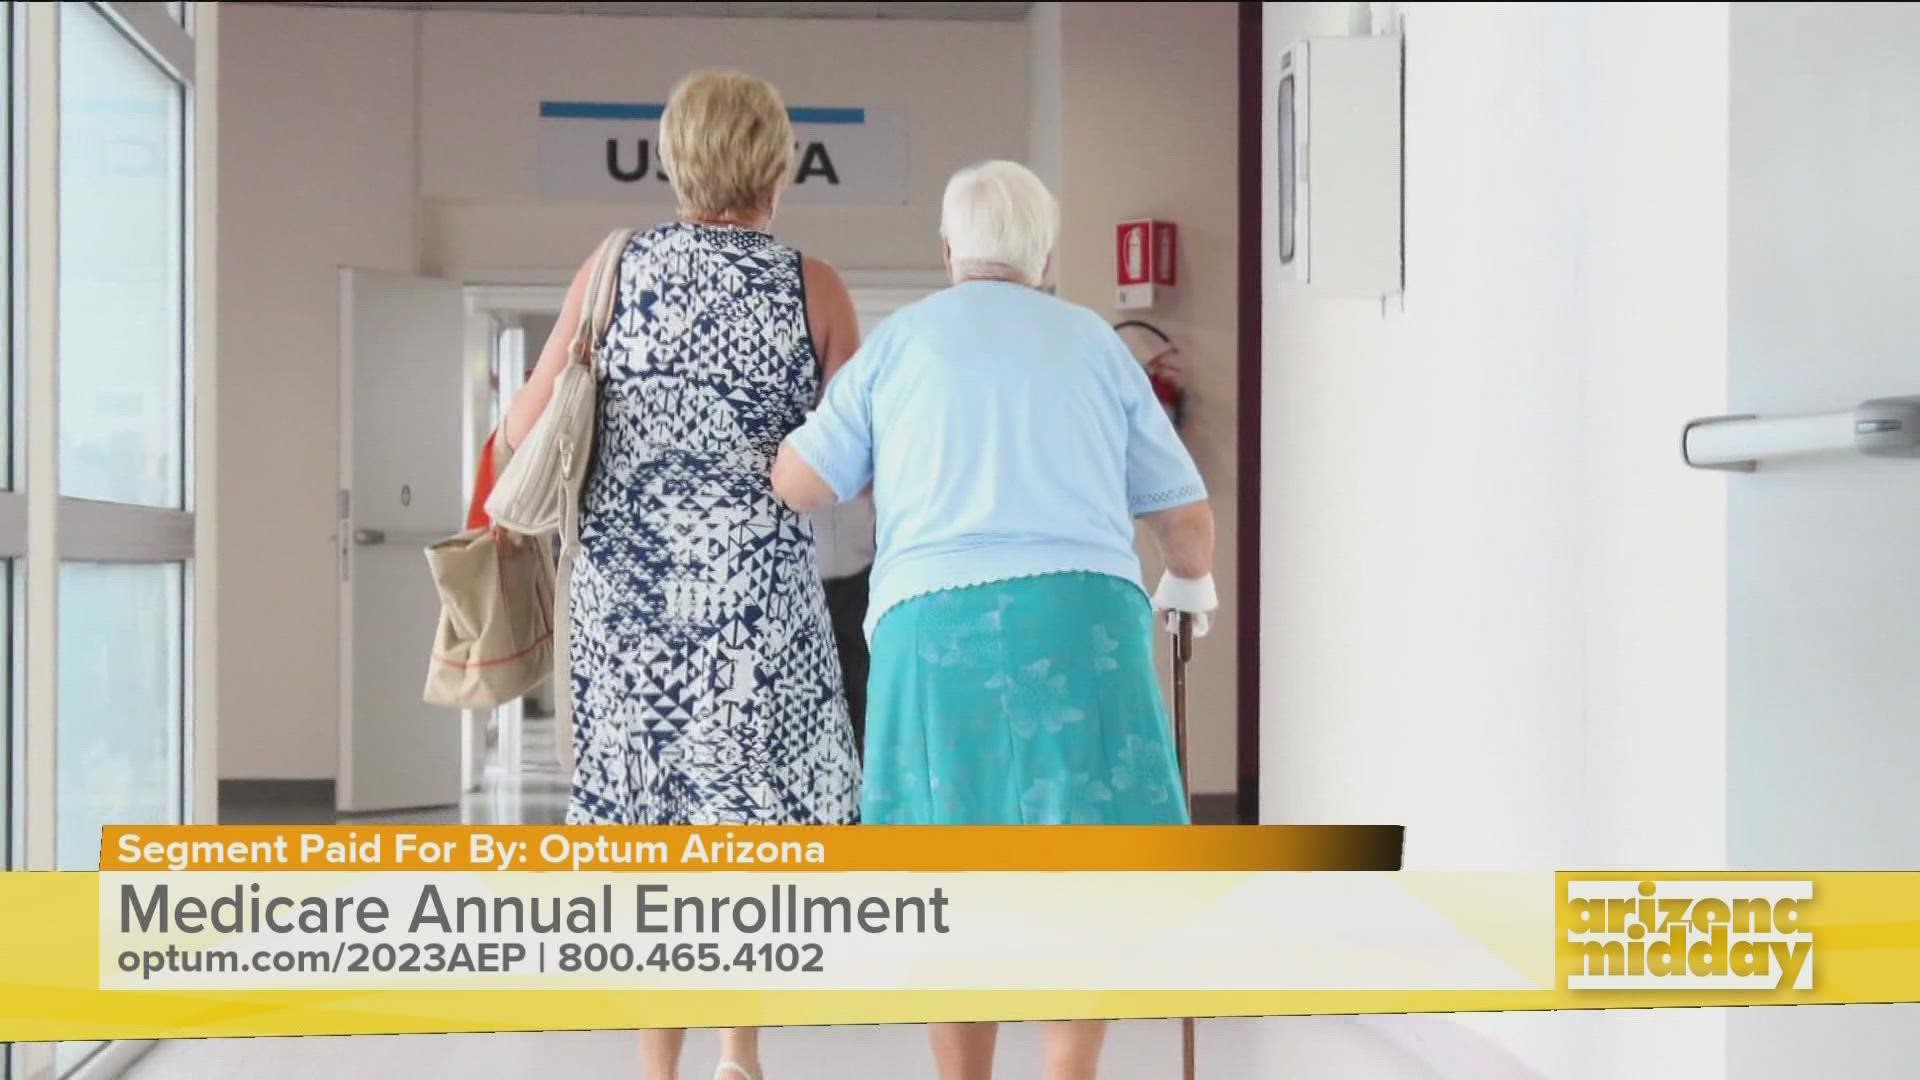 Dr. Kimberly Klatt breaks down what we need to know about the Medicare Enrollment period and how Optum Arizona can help.